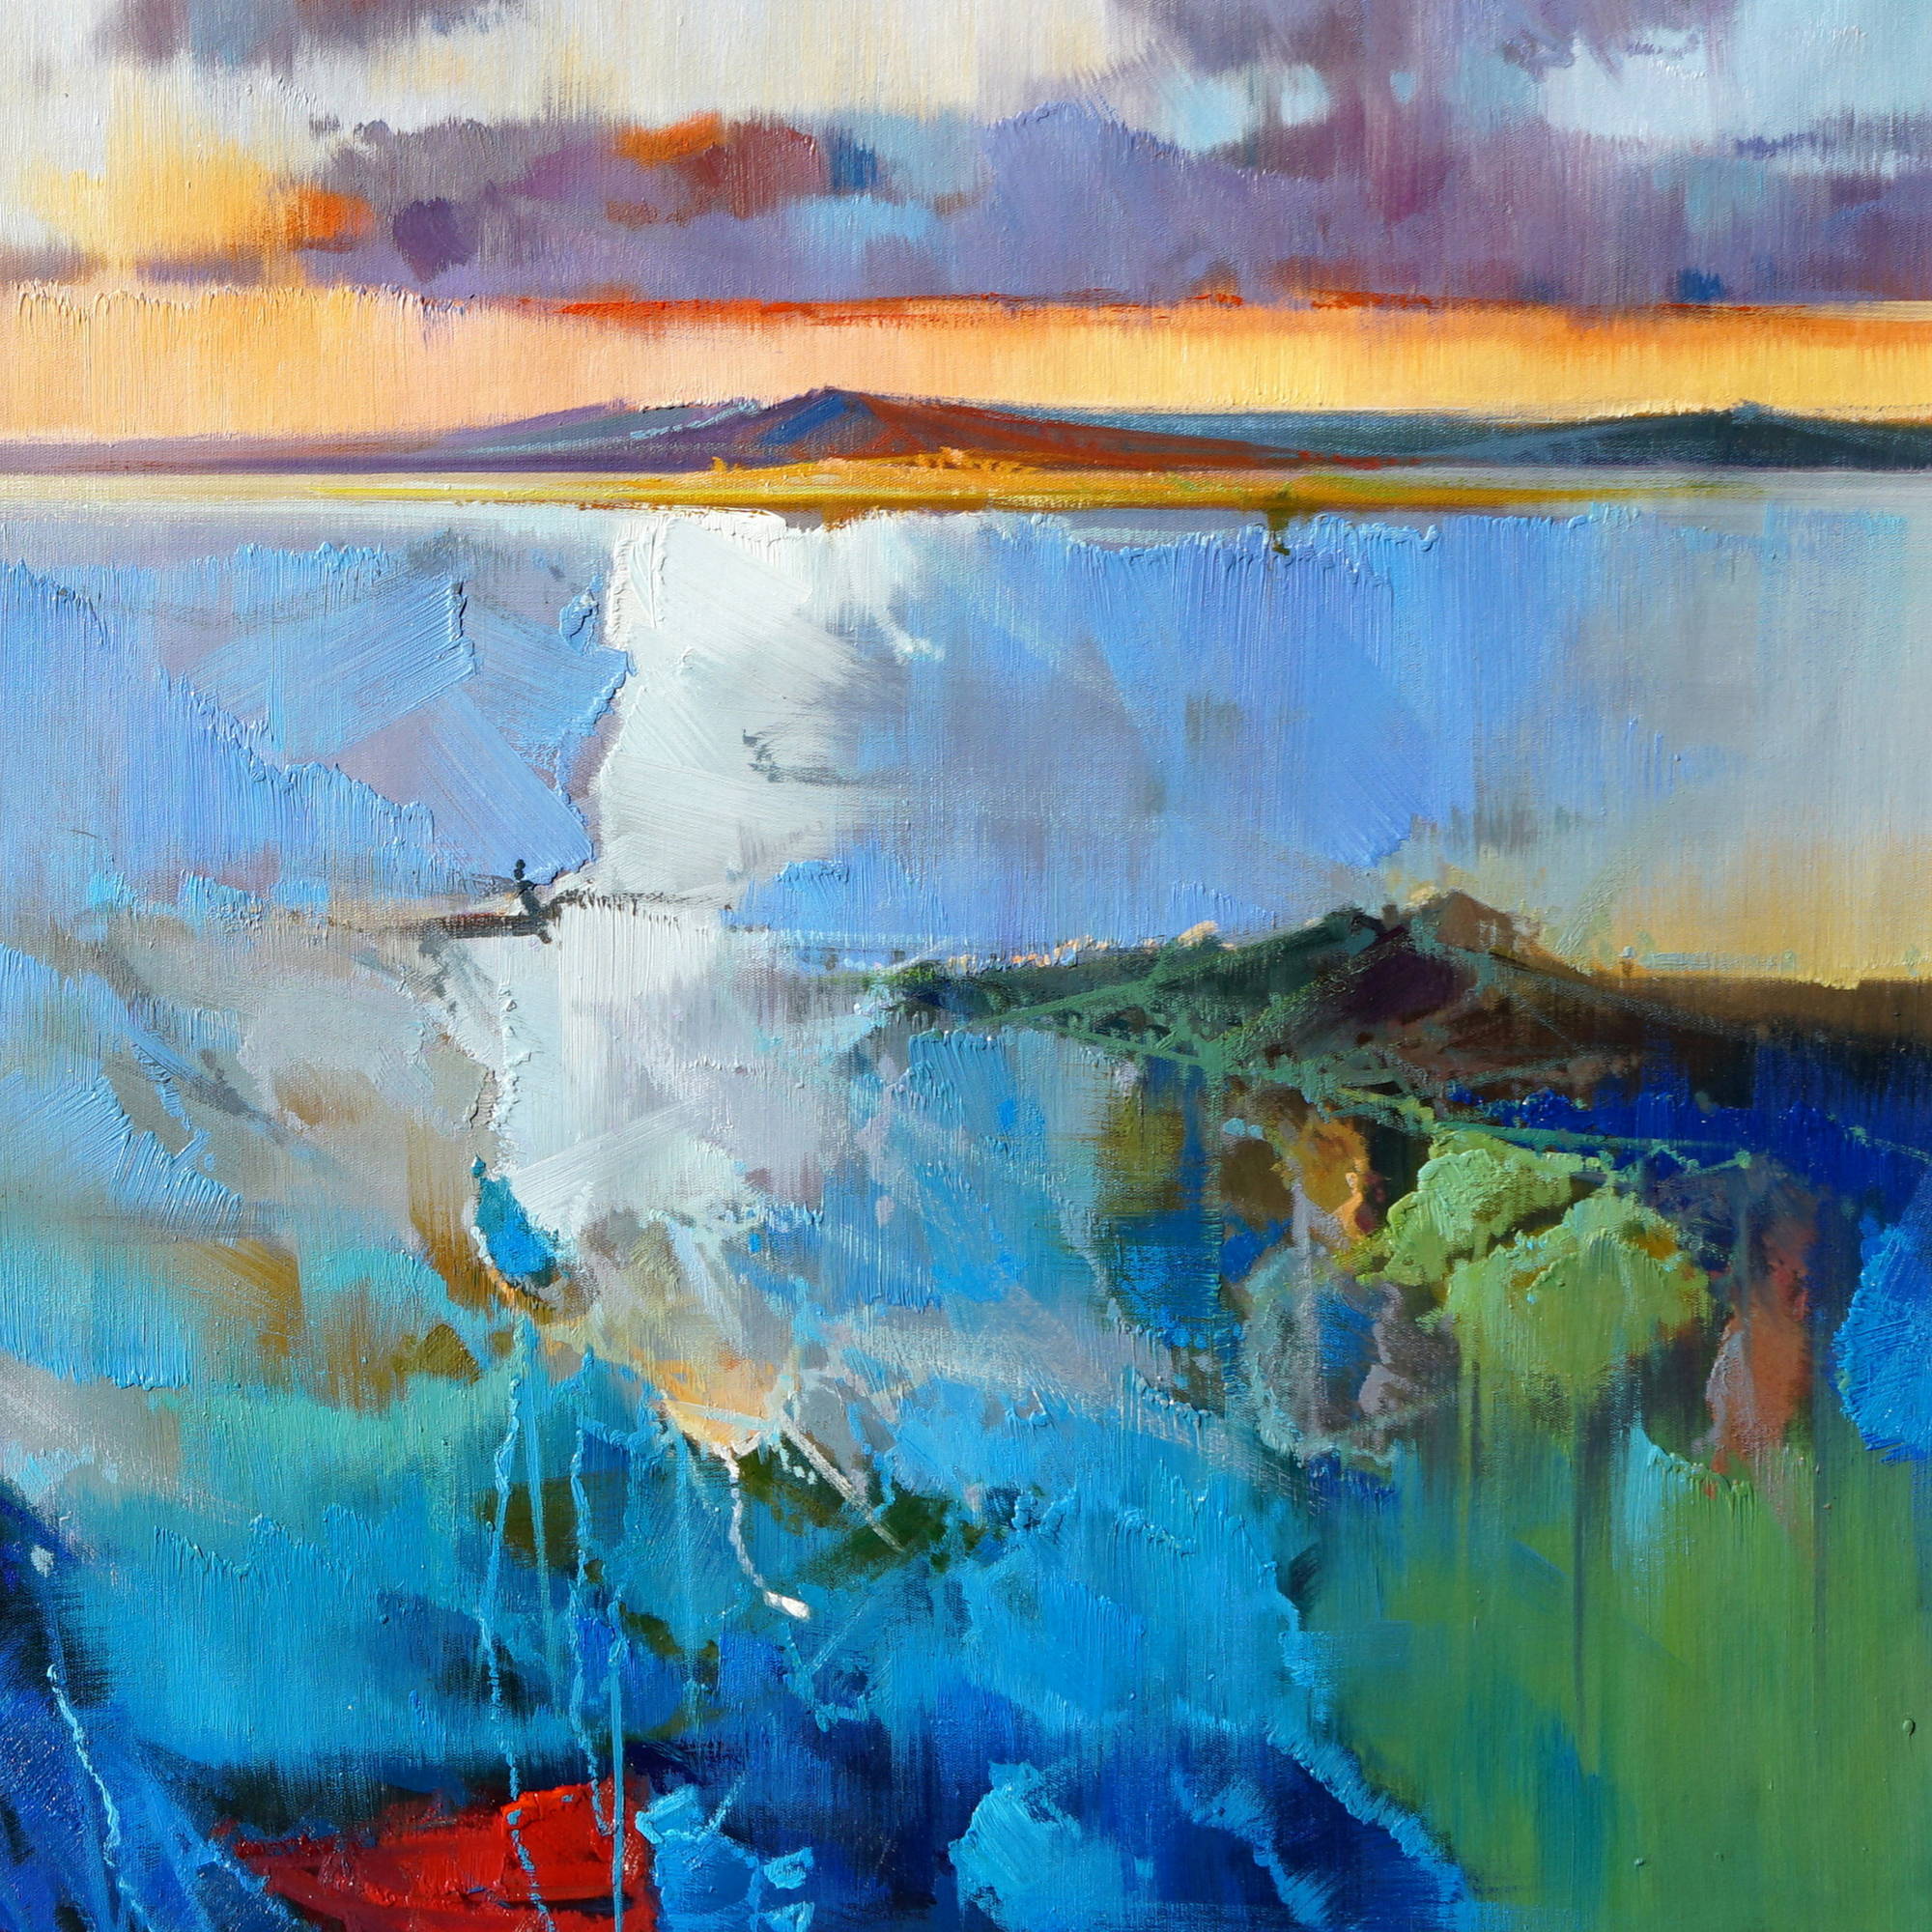 Hand painted Abstract Landscape at sunset 90x180cm